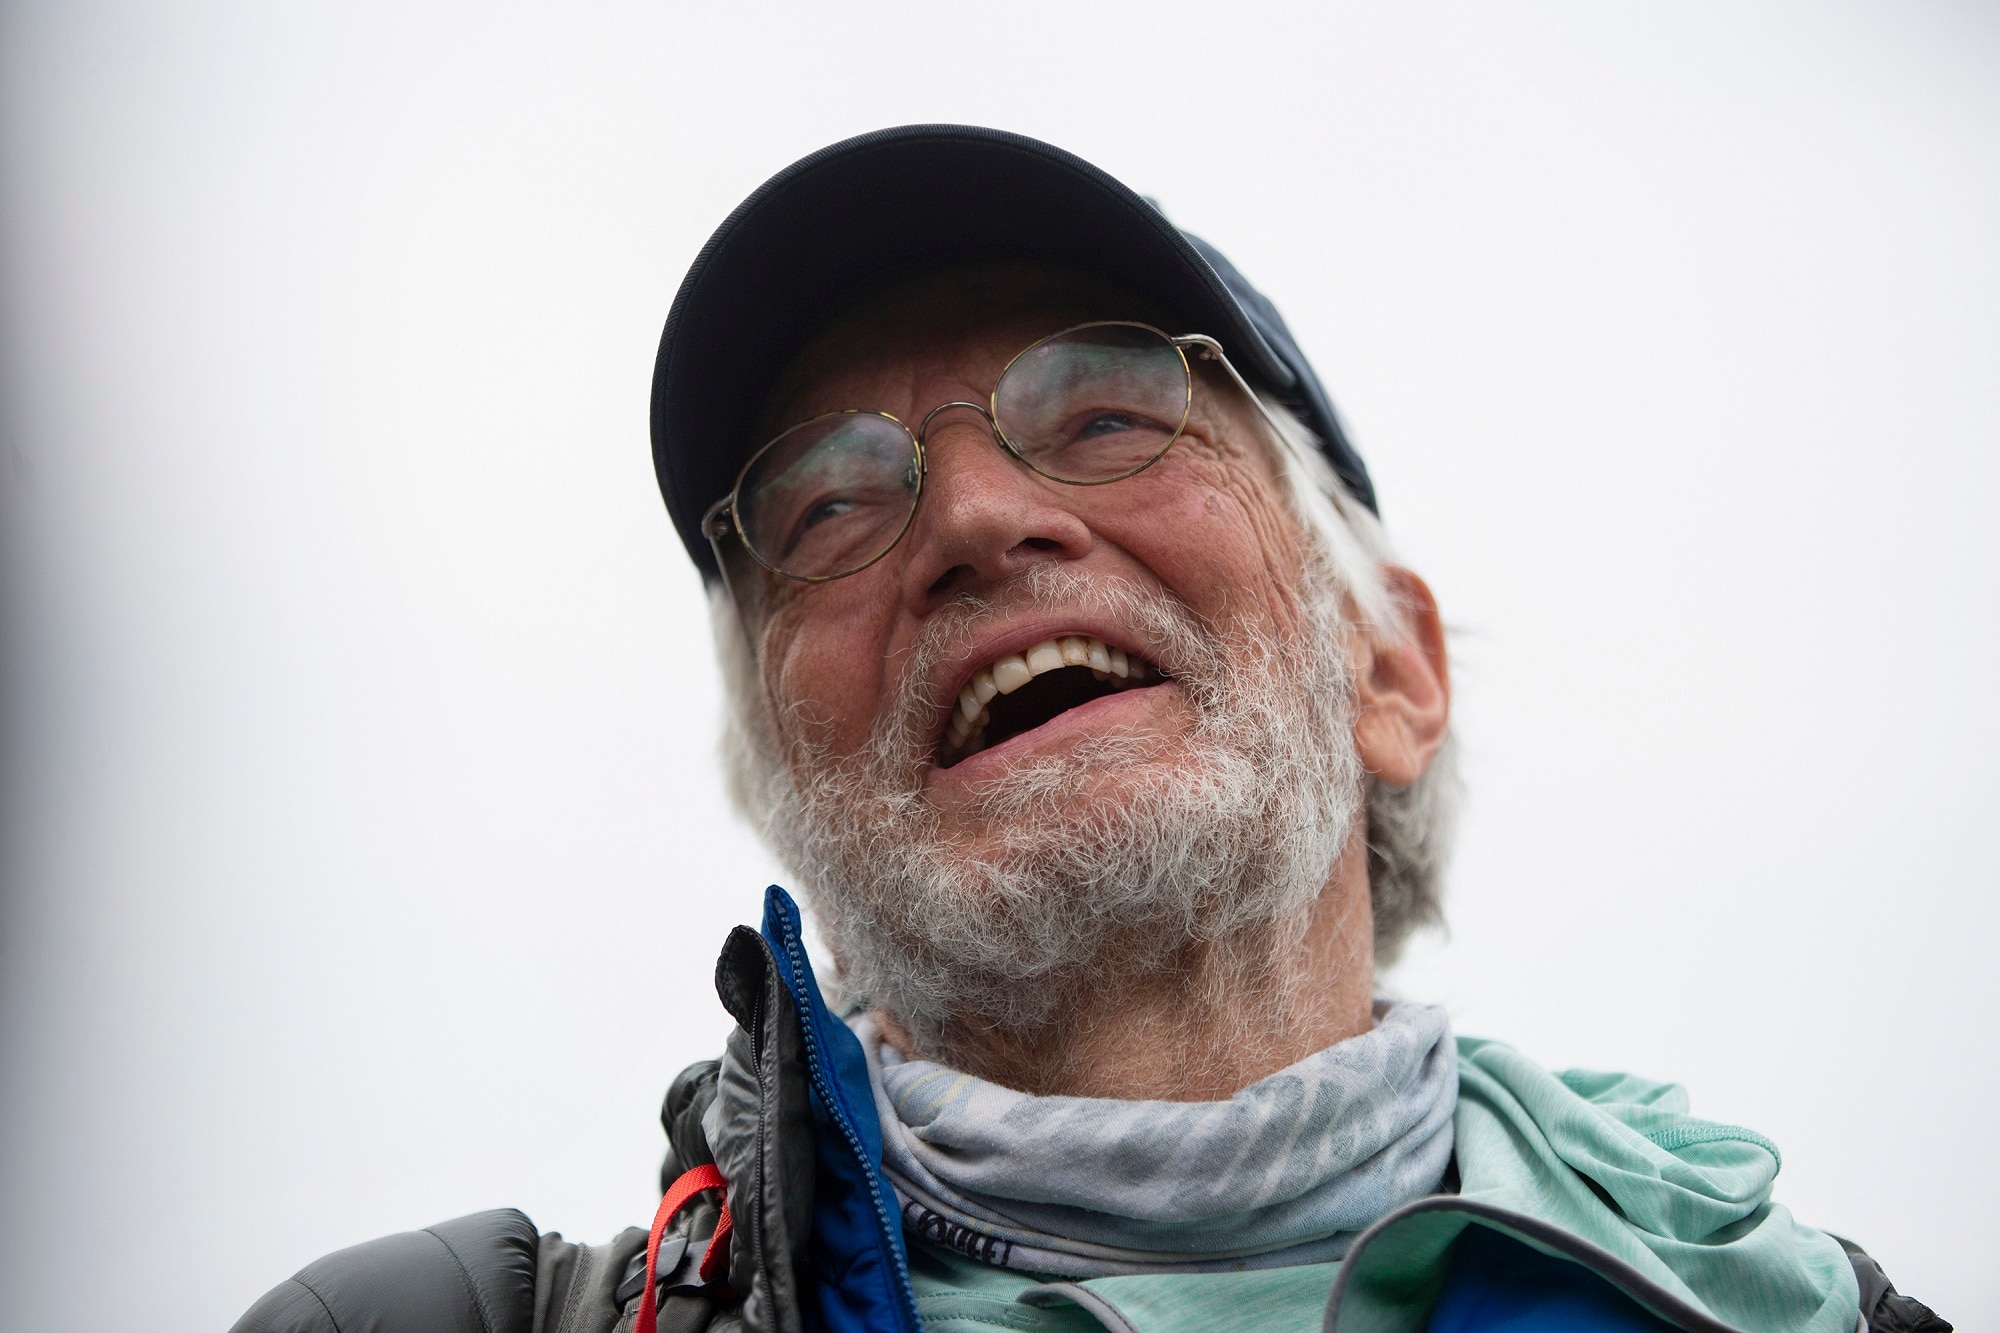 American climber Arthur Muir, 75, has become the oldest US national to scale Mount Everest.